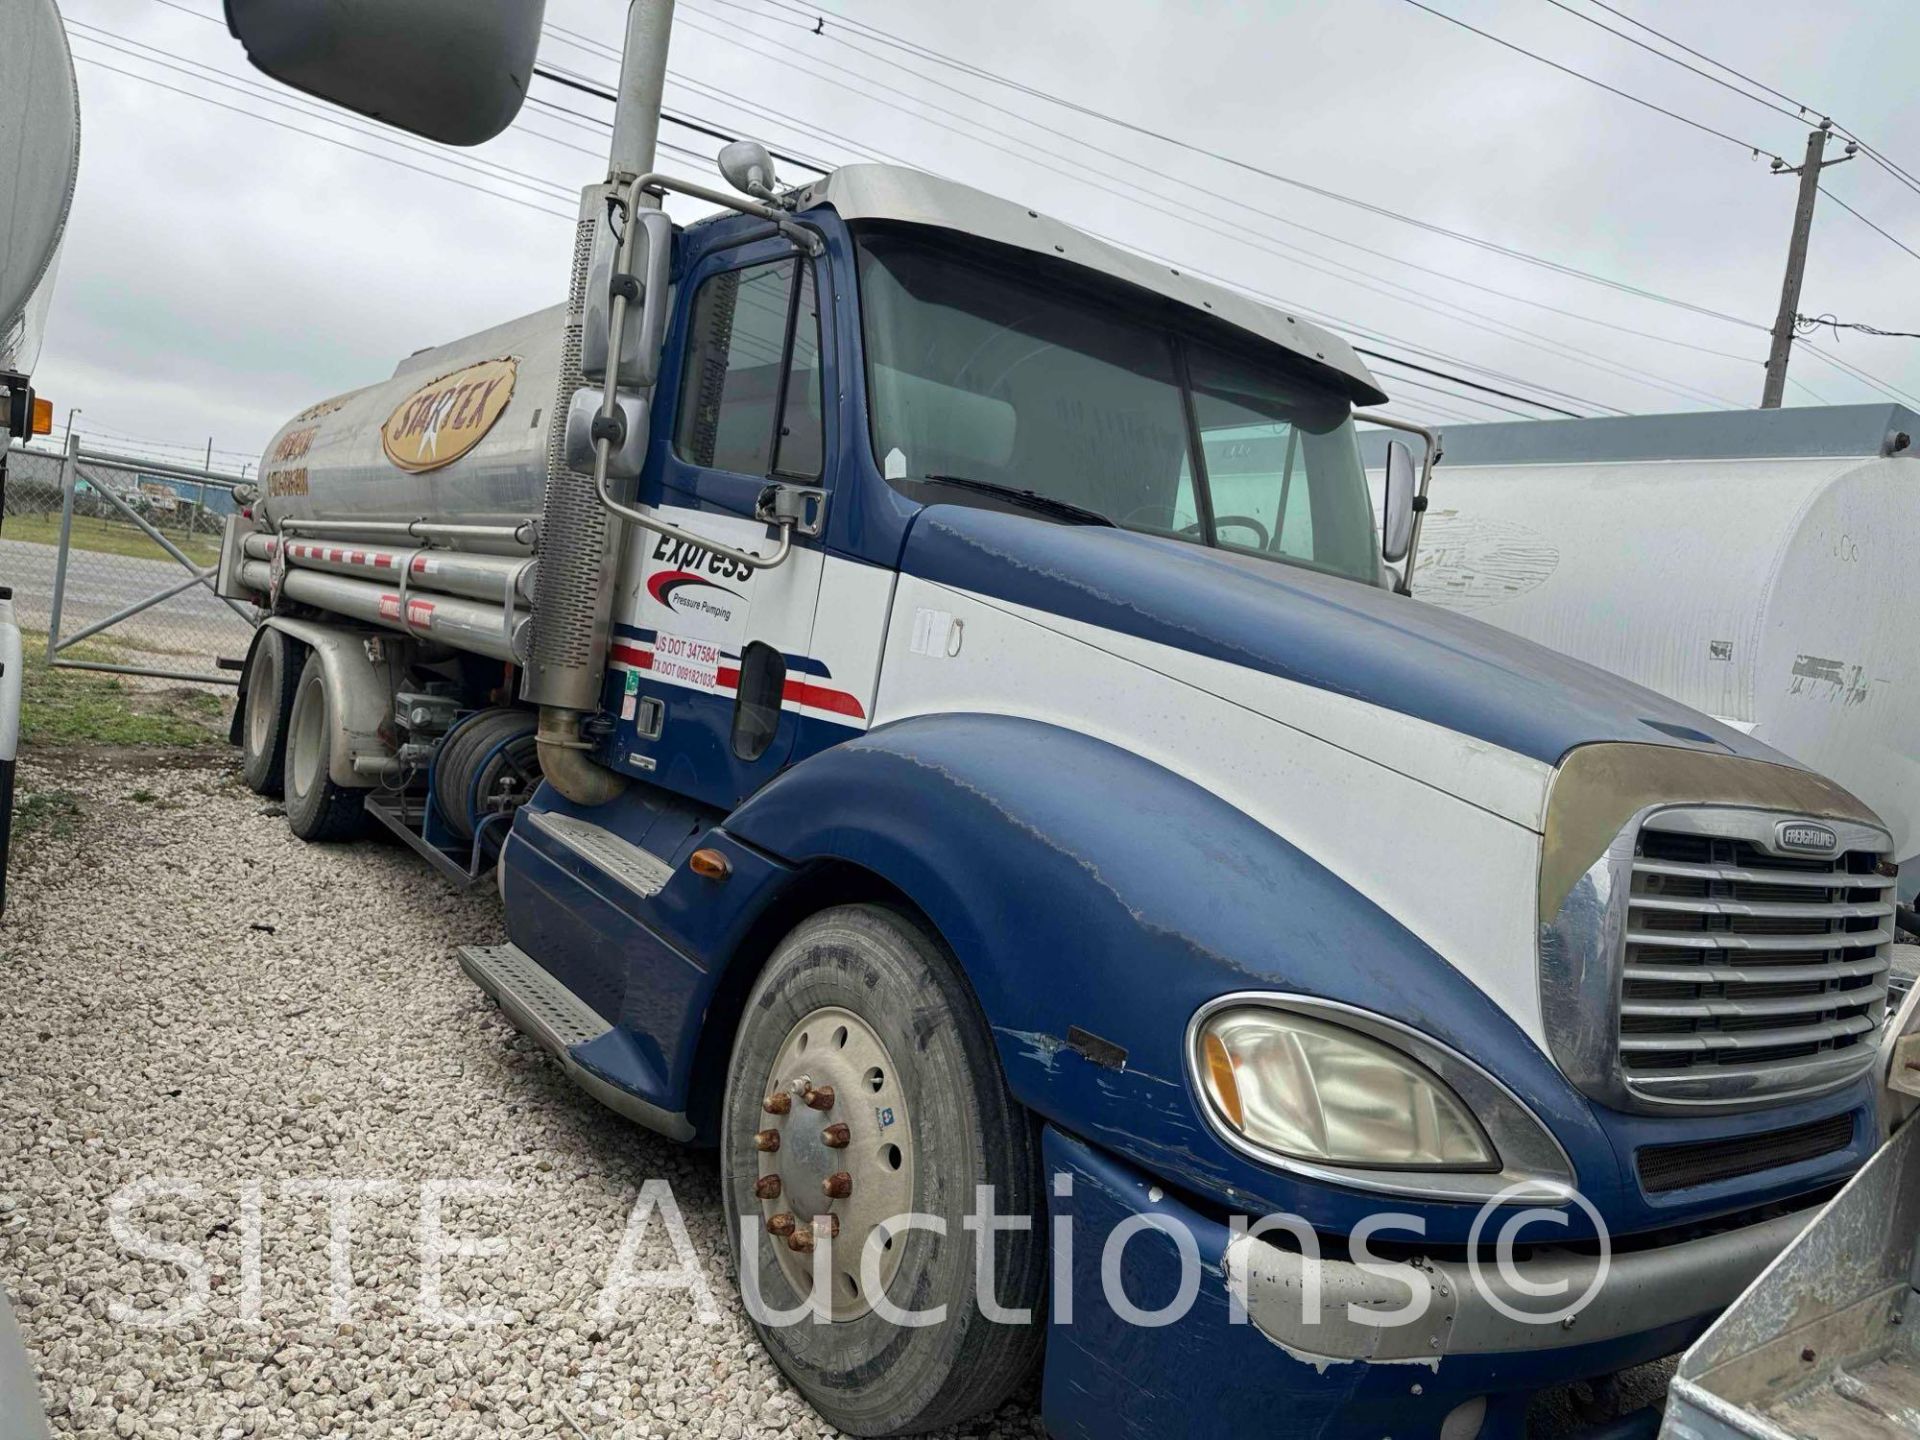 2004 Freightliner Columbia T/A Fuel Truck - Image 4 of 85